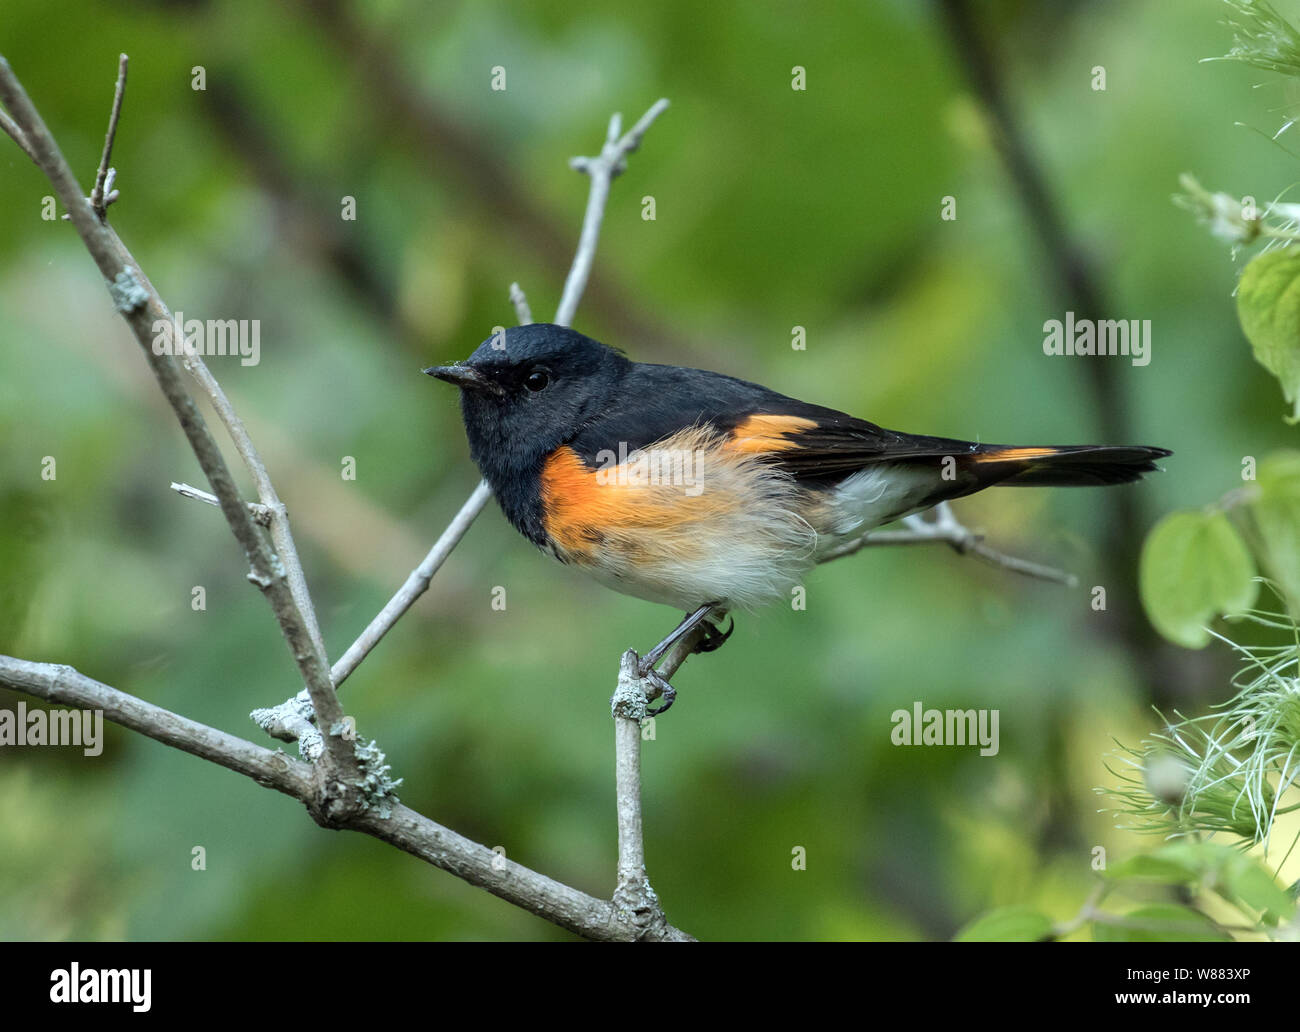 Closeup of orange and black bird, American Redstart ( Setophaga ruticilla) perched on a leafy branch during fall migration in Ontario,Canada Stock Photo